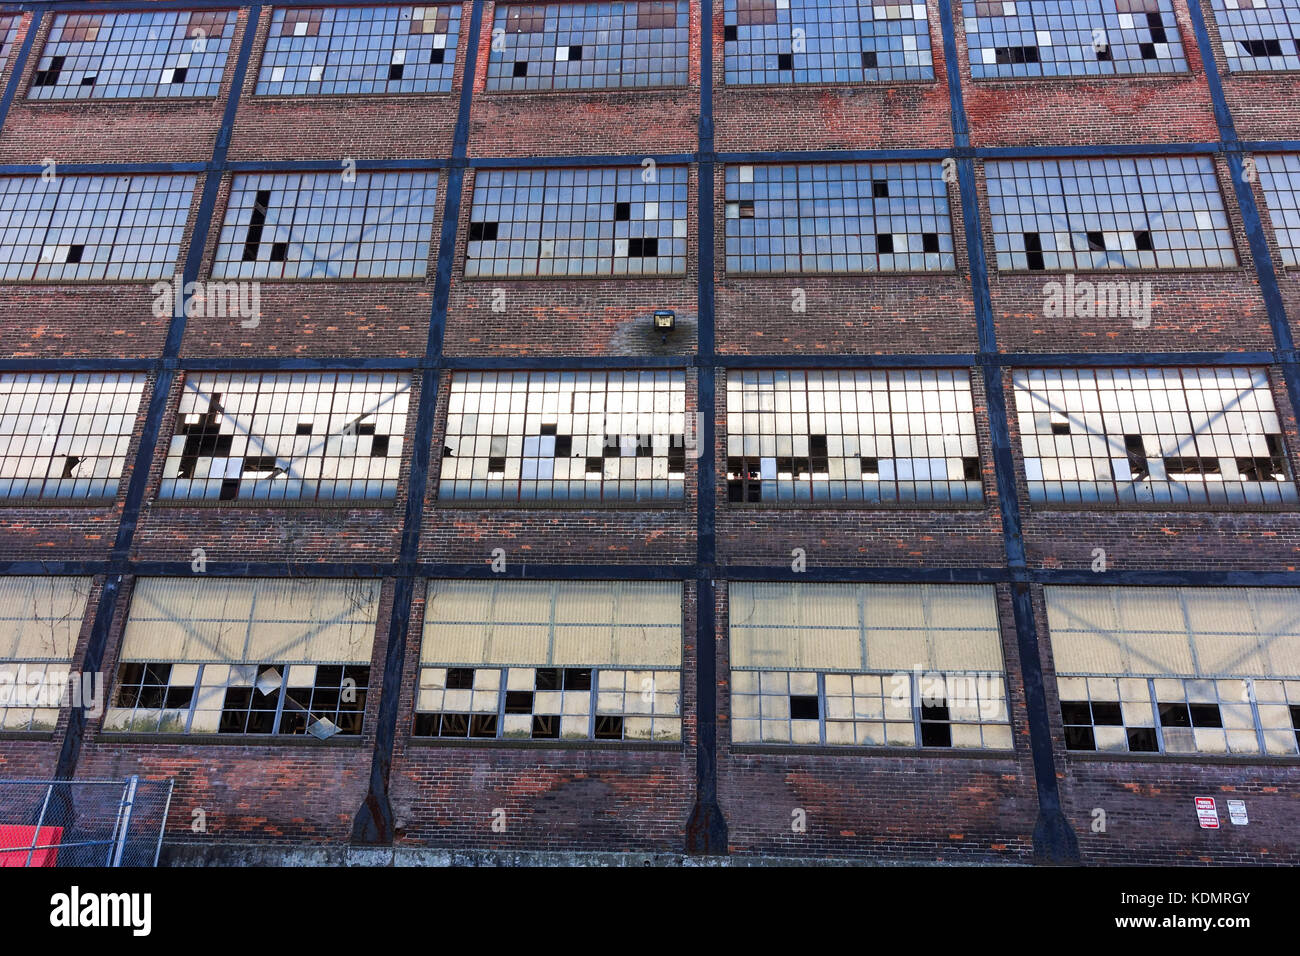 Window facade factory, Steelstacks, Bethlehem Steel Plant factory, Pennsylvania,, Abandoned rusting remains, now arts and events centre, USA. Stock Photo